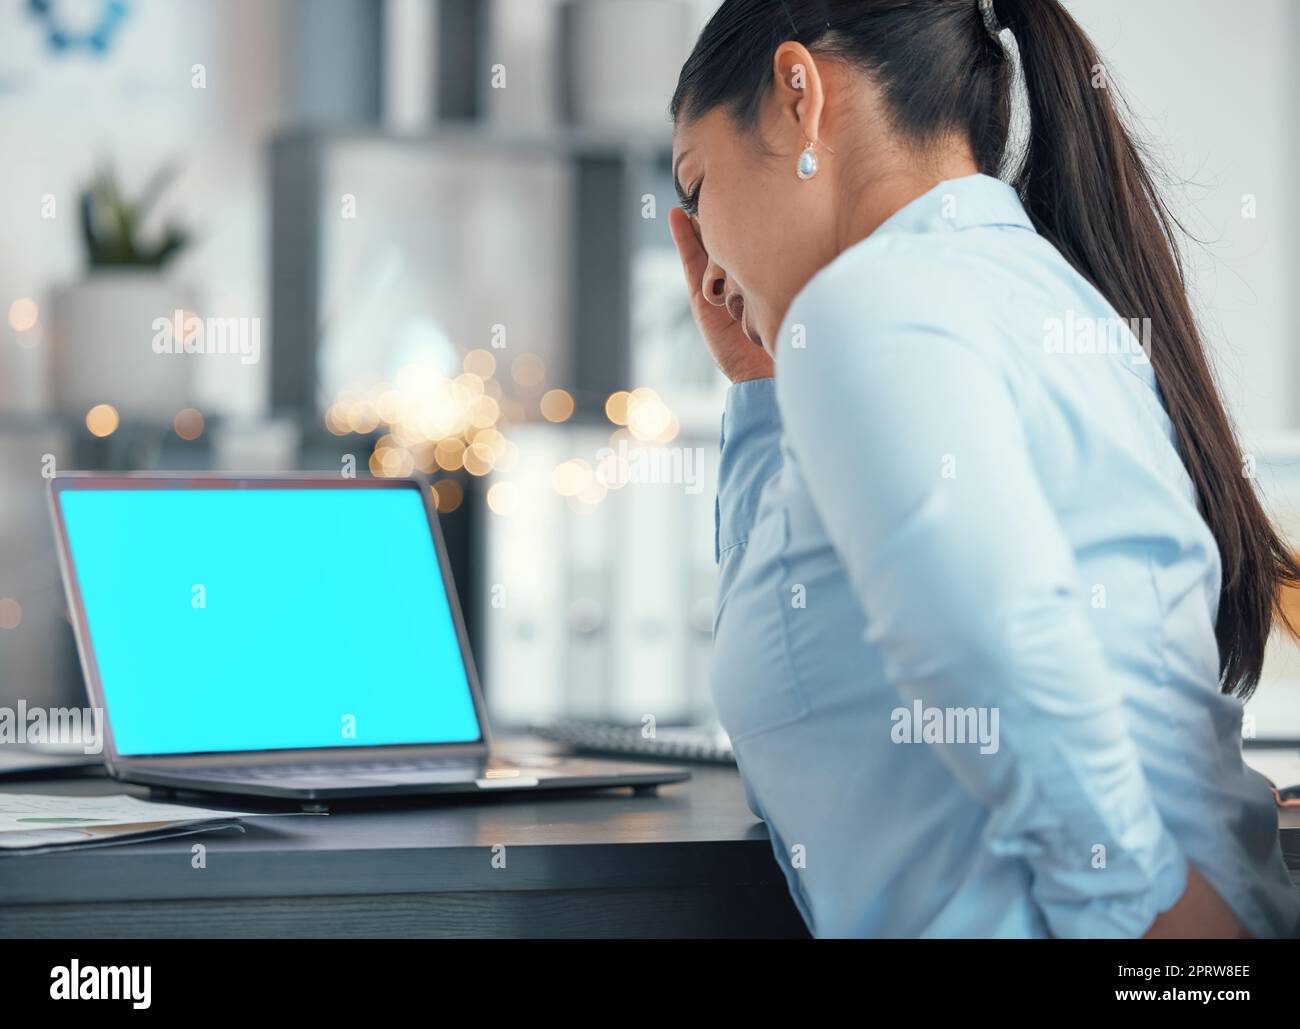 Headache, pain and back injury by business woman working on a laptop, suffering with backache and spine issue. Stress, tension and muscle issue by entrepreneur in distress at work from bad posture Stock Photo